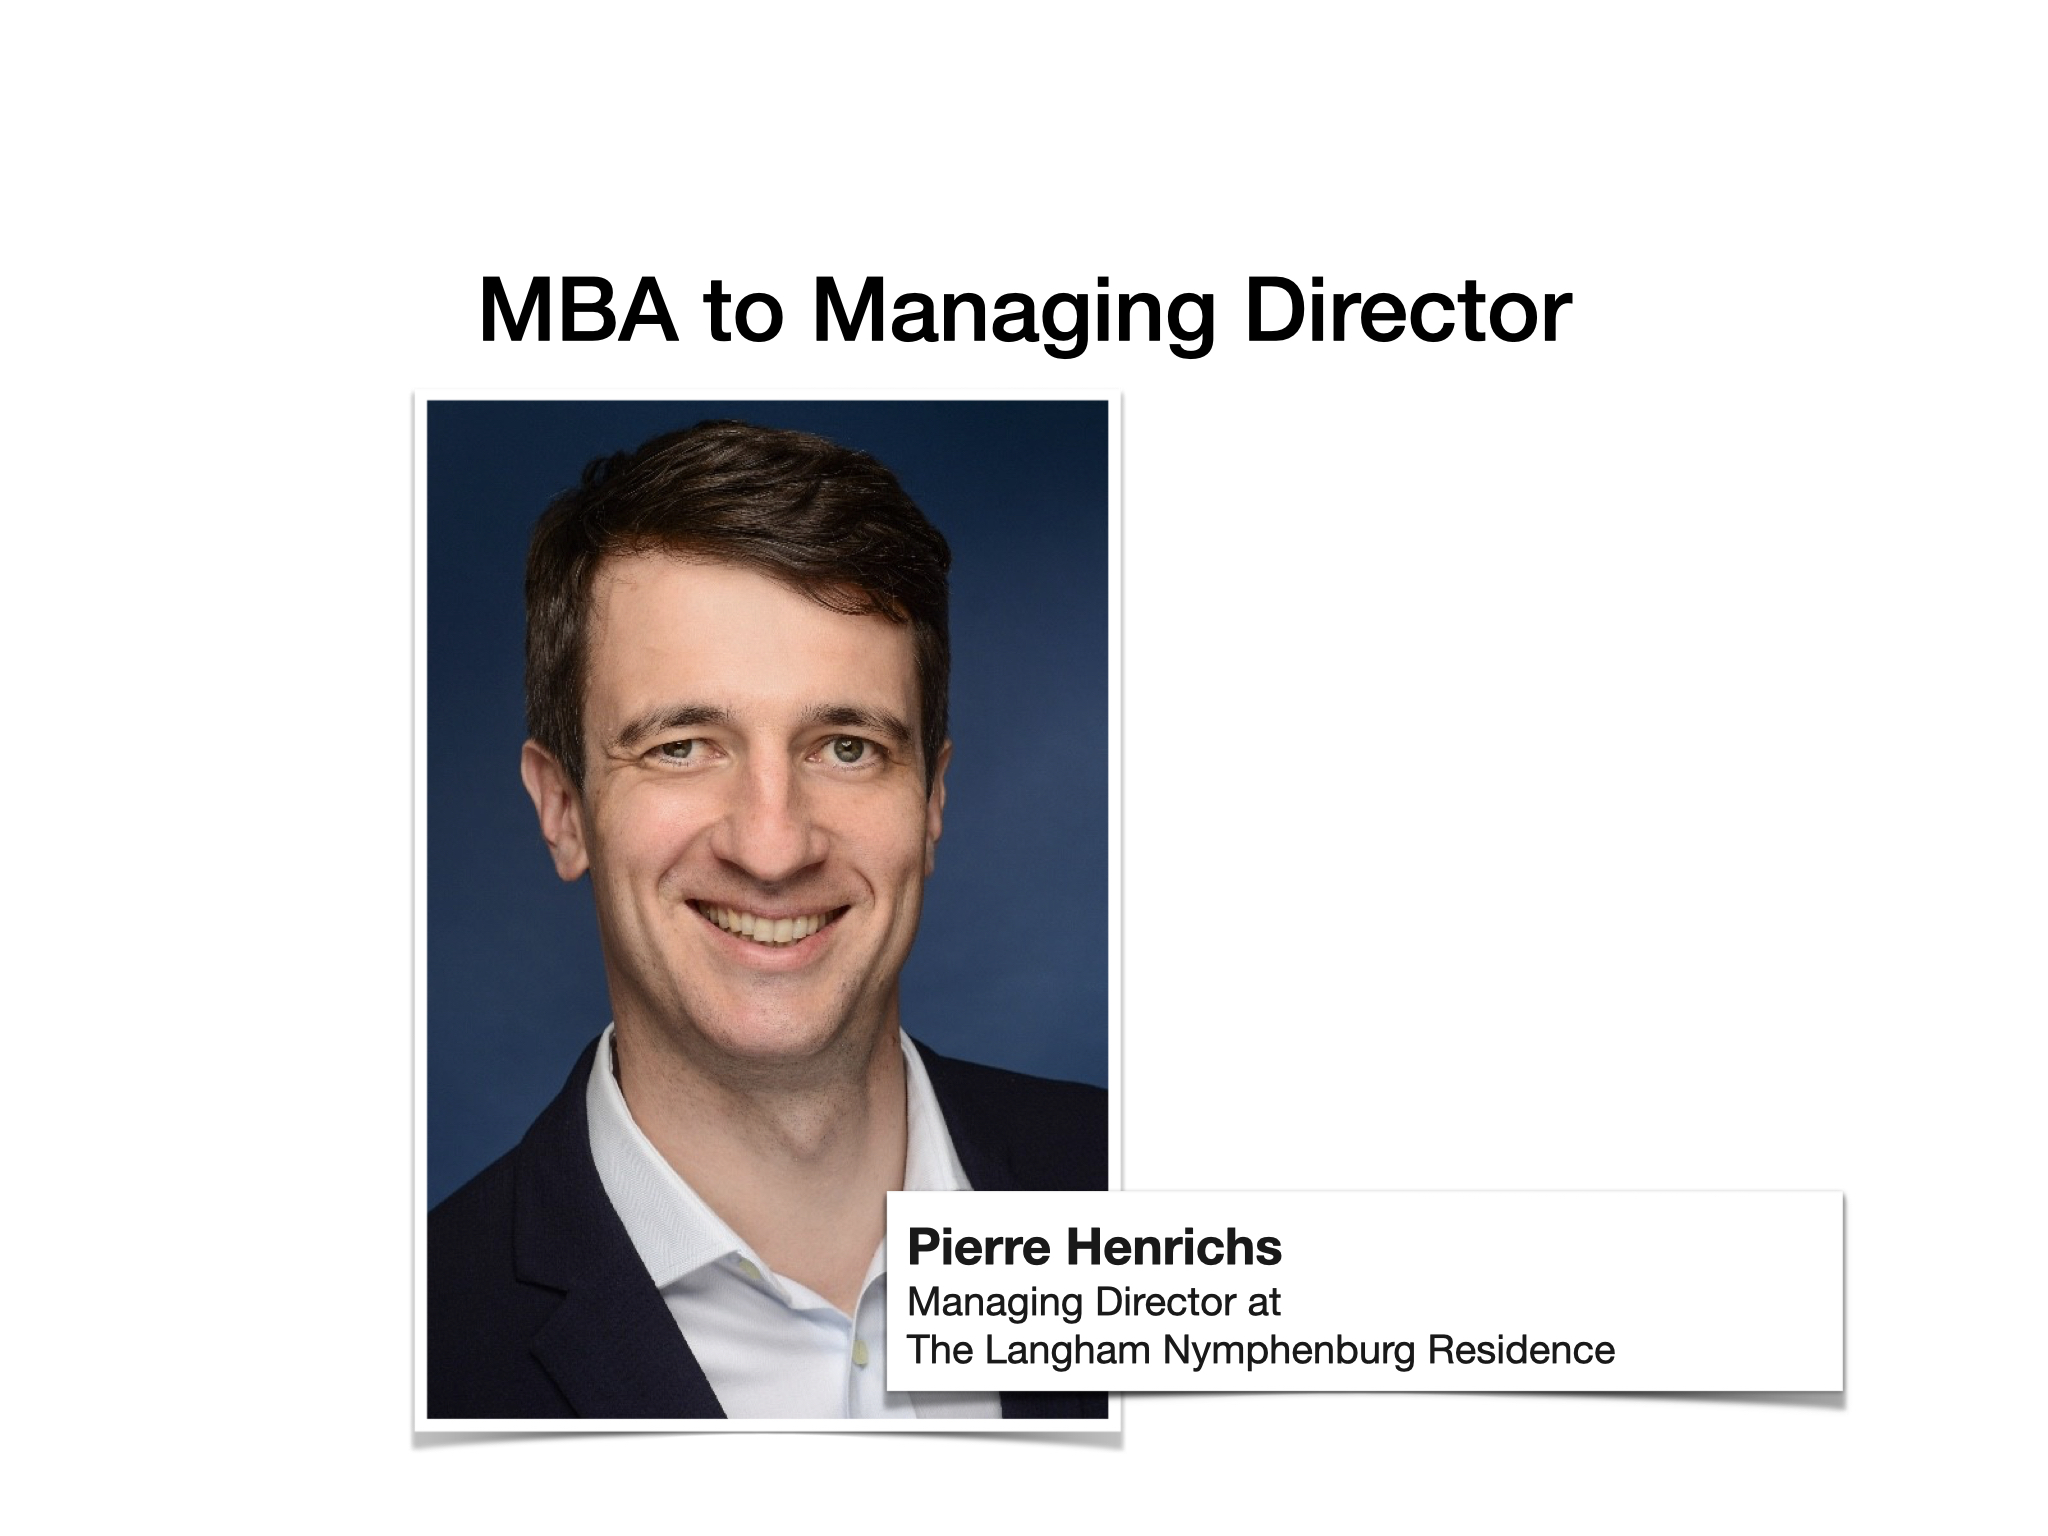 Pierre Henrichs - MBA to Managing Director at The Langham Nymphenburg Residence